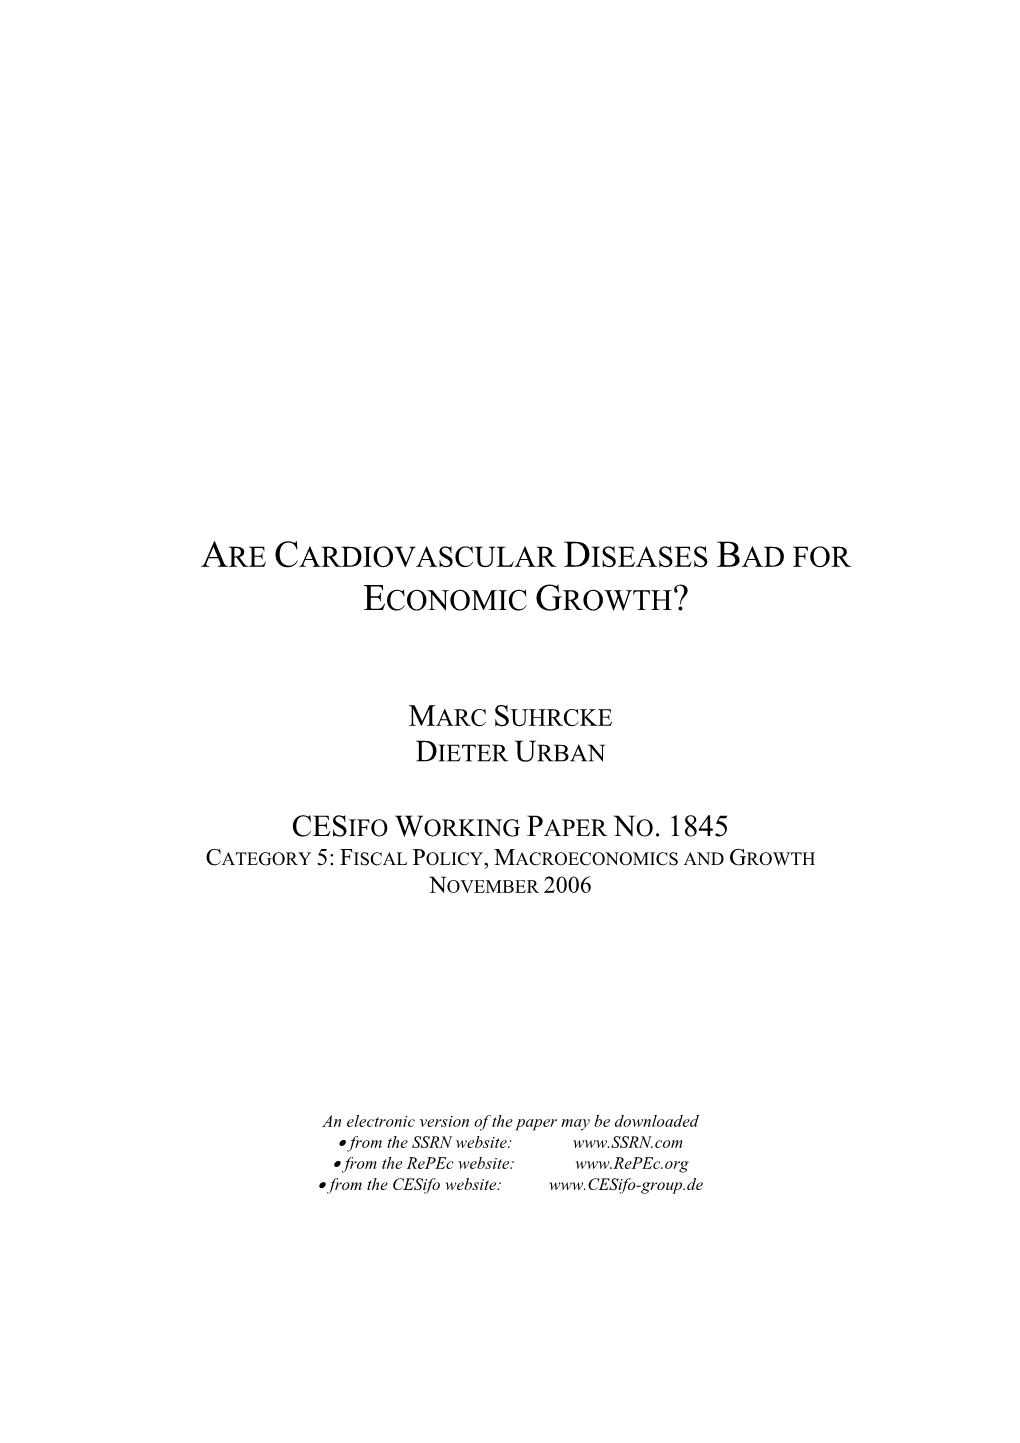 Are Cardiovascular Diseases Bad for Economic Growth?